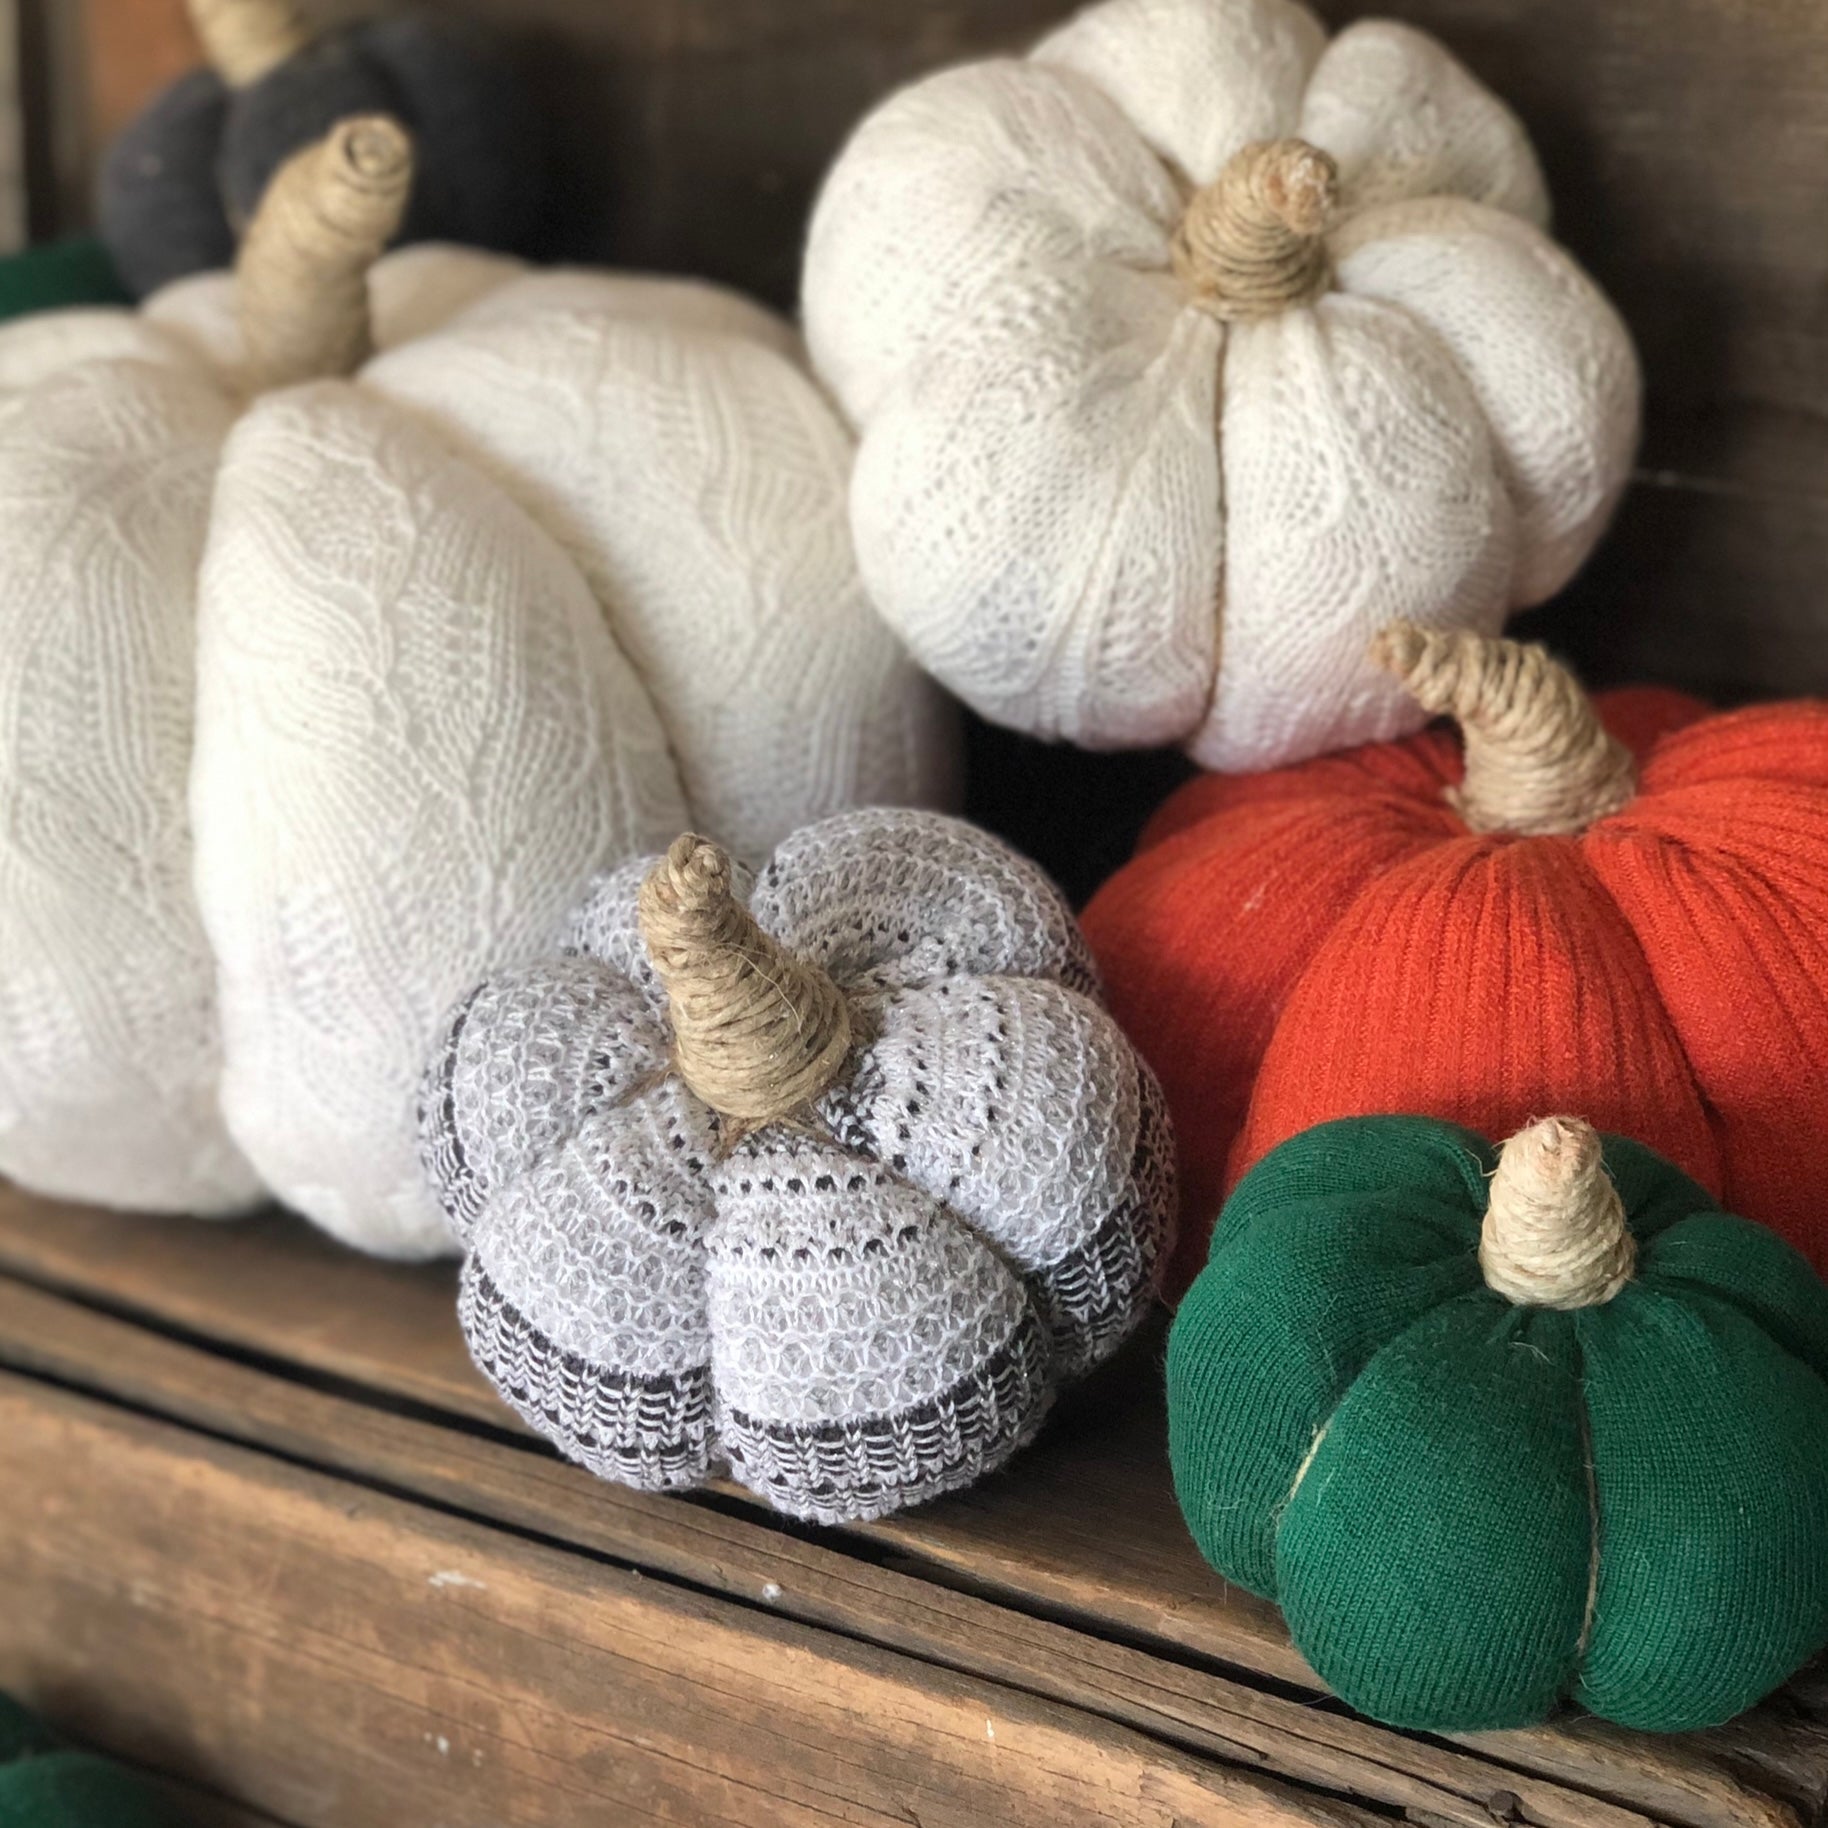 Sweater Pumpkin Workshop: Tuesday, October 24th 6 - 8:00pm with Sarah Young